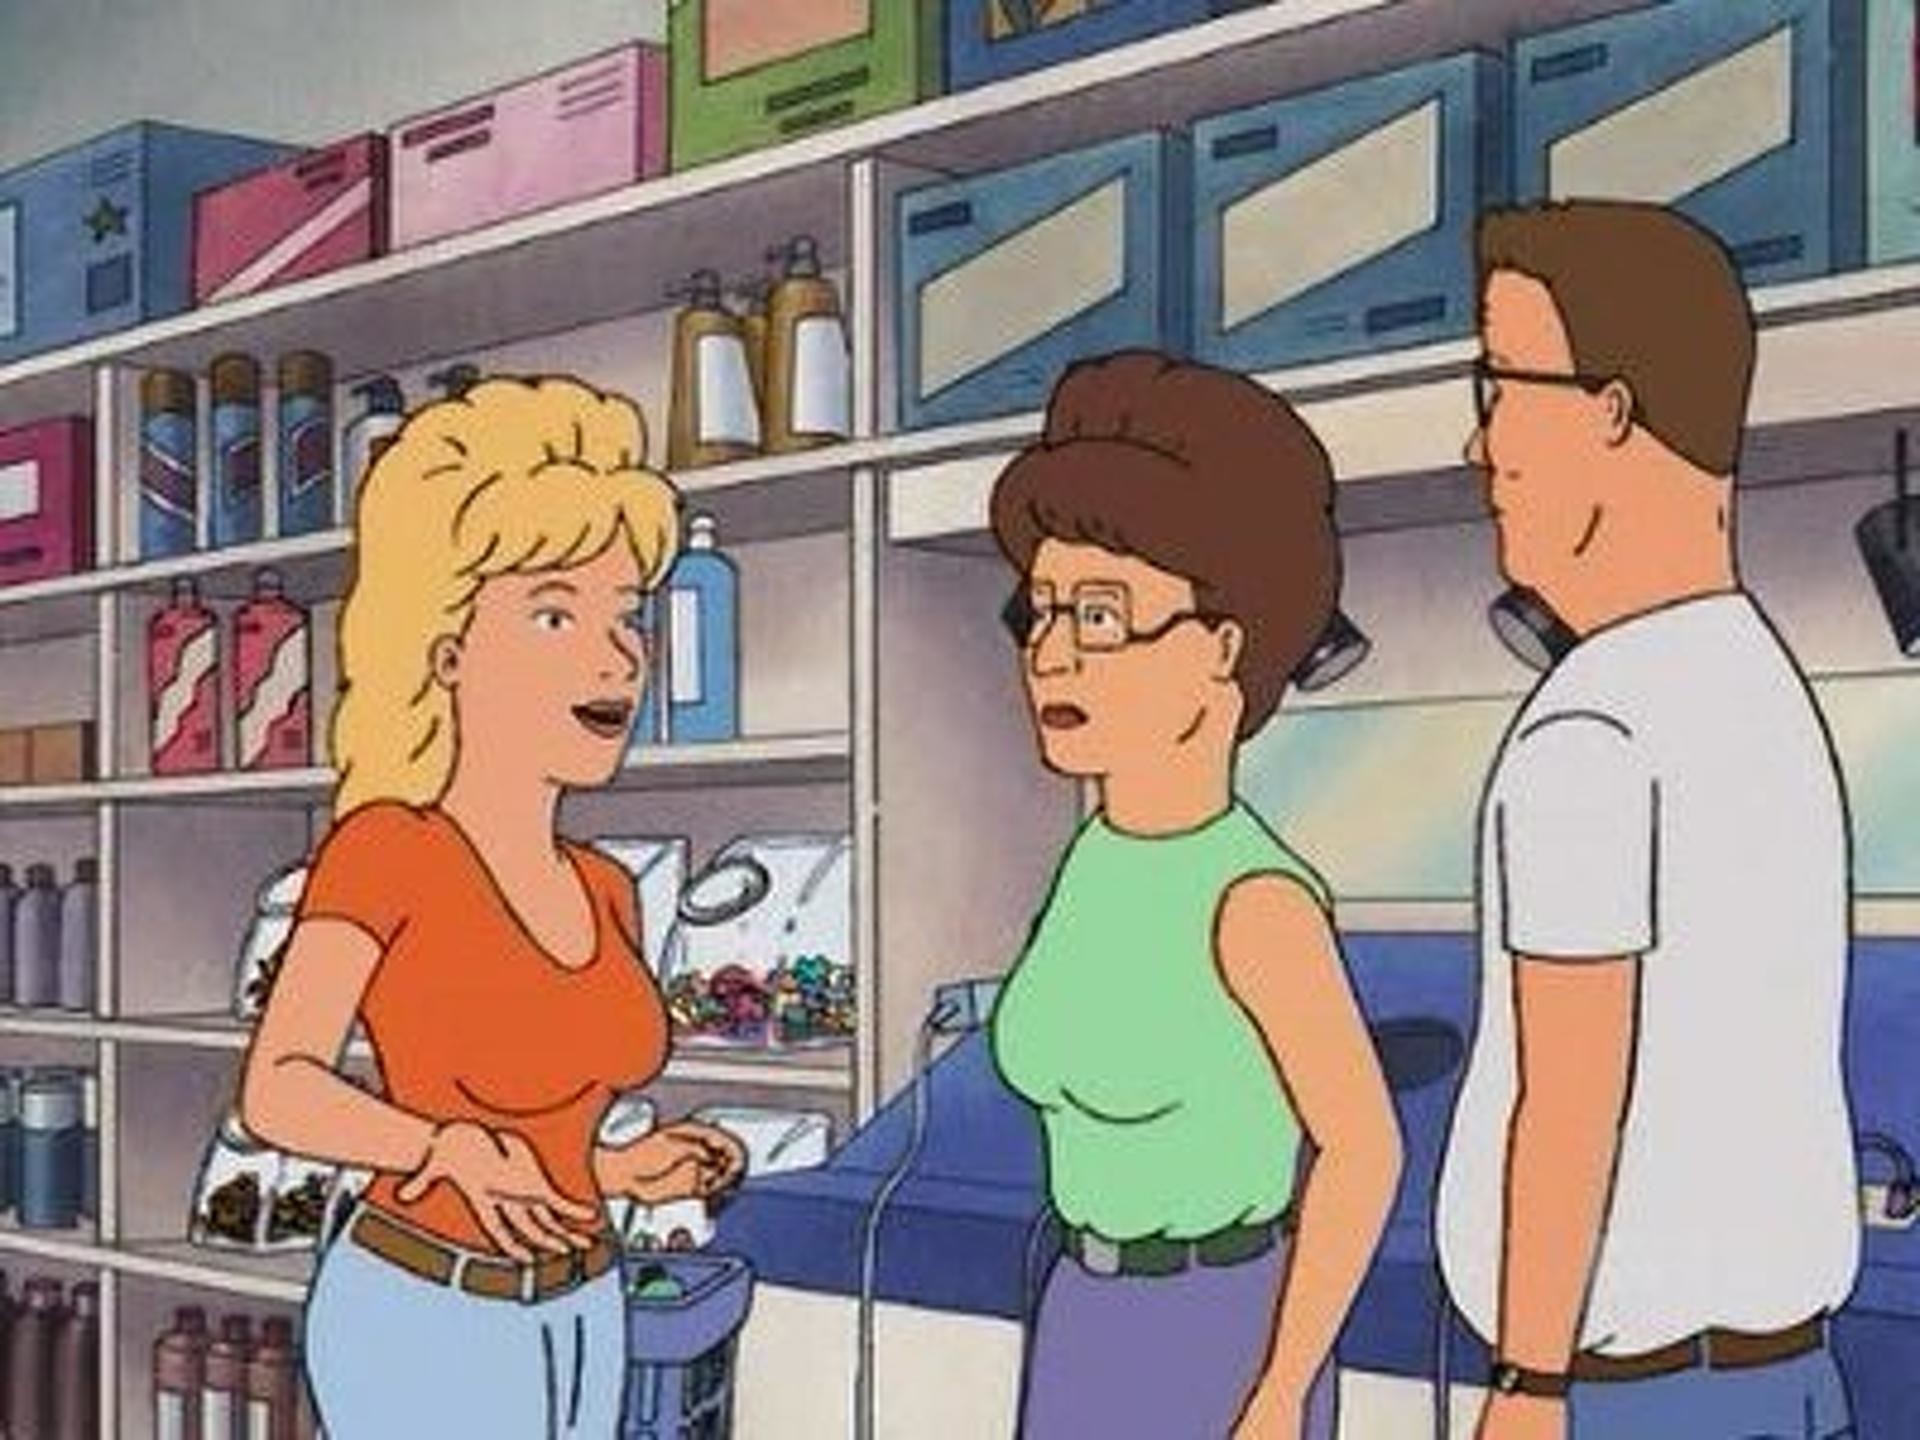 1920x1440 King of the Hill (S08E11): My Hair Lady Summary - Season 8 Episode 11 Guide